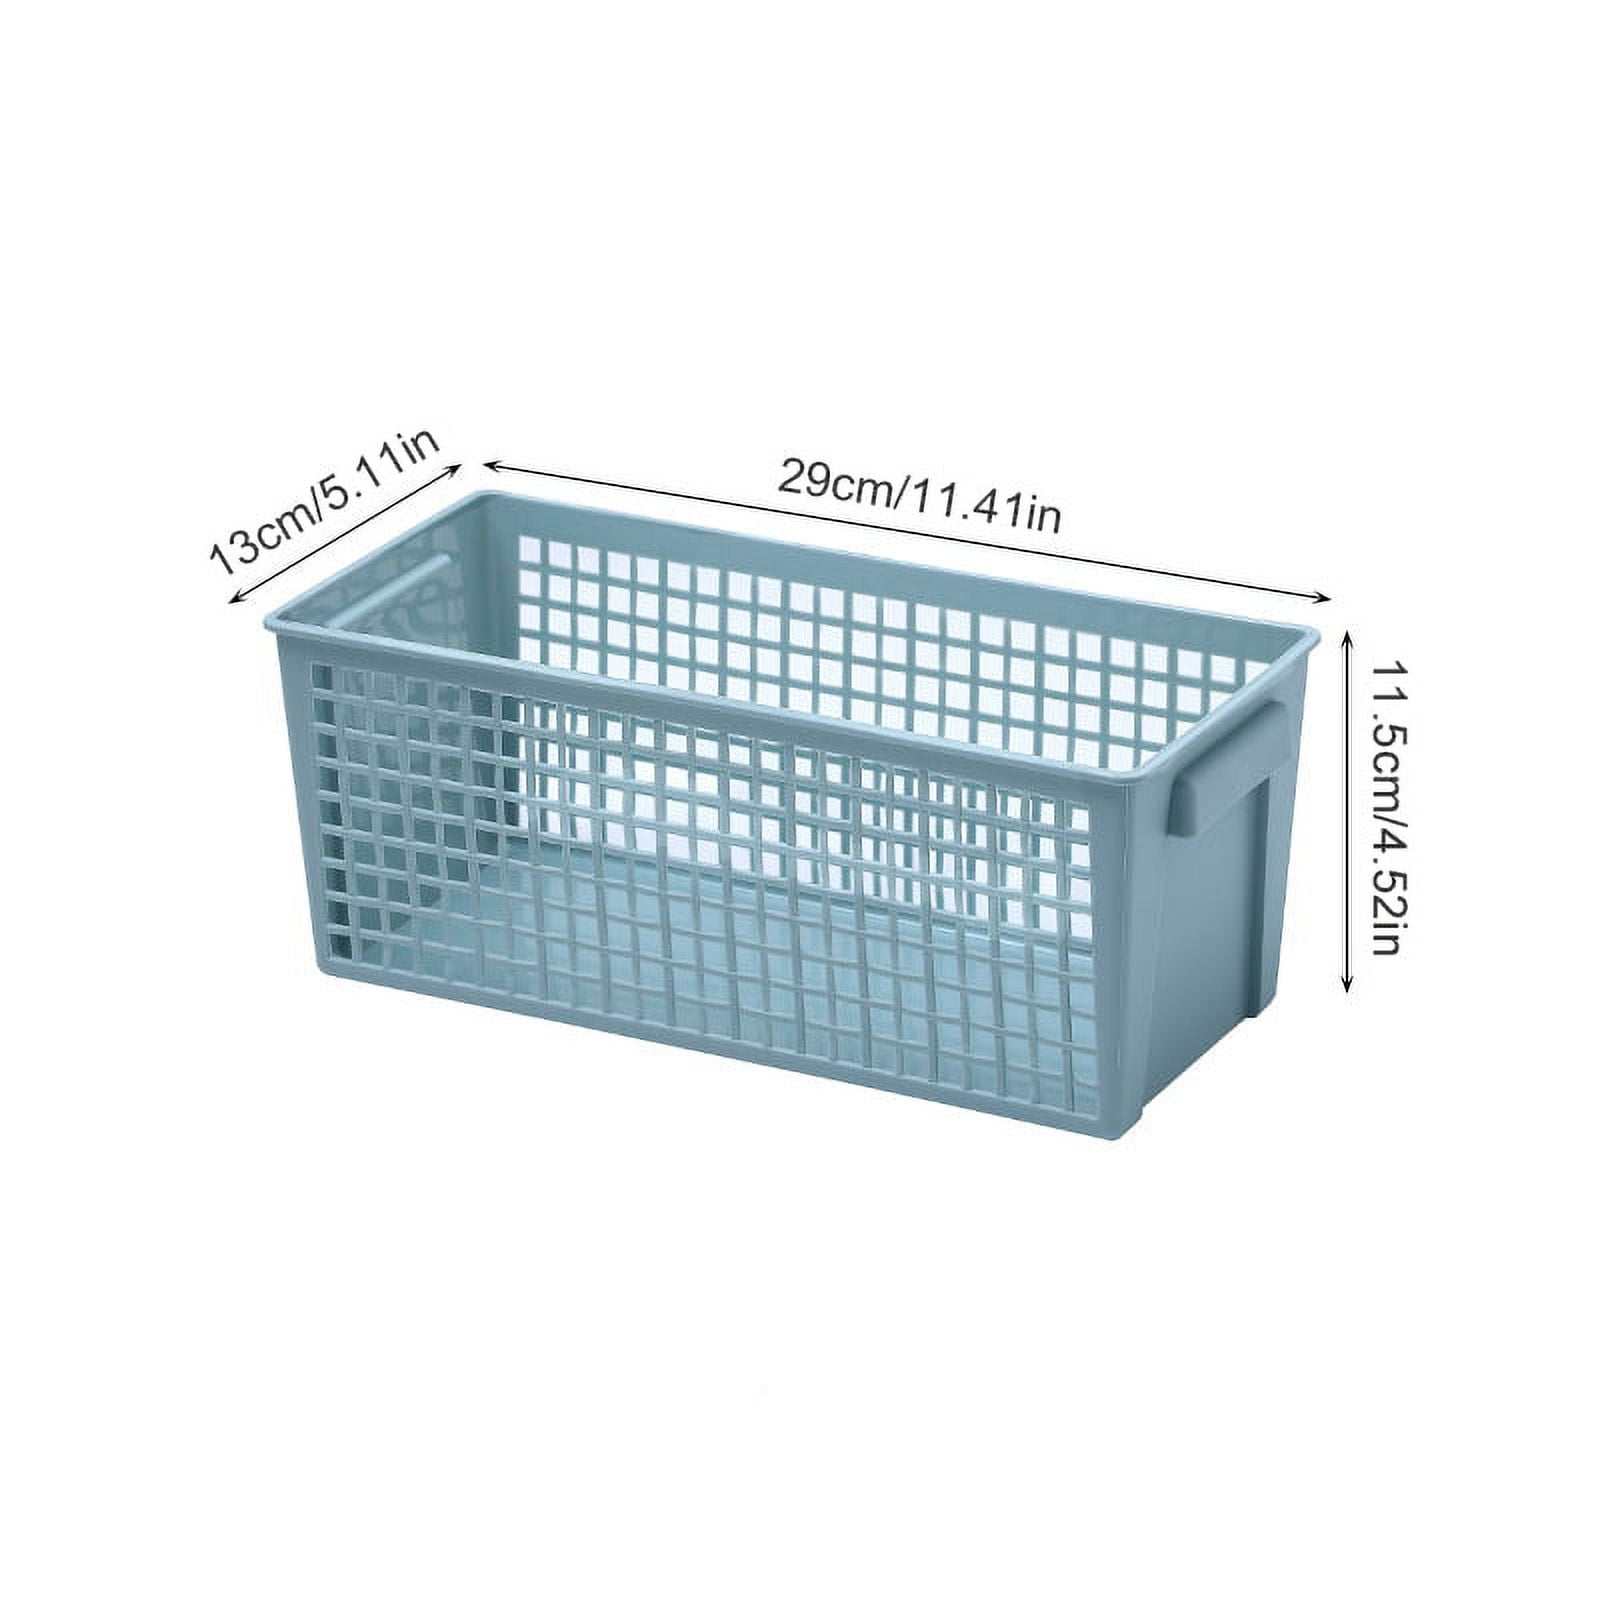 Large Plastic Desktop Storage Baskets, 13¼ by 10 by 5½ Single Basket –  Available in 7 DifferentColors –